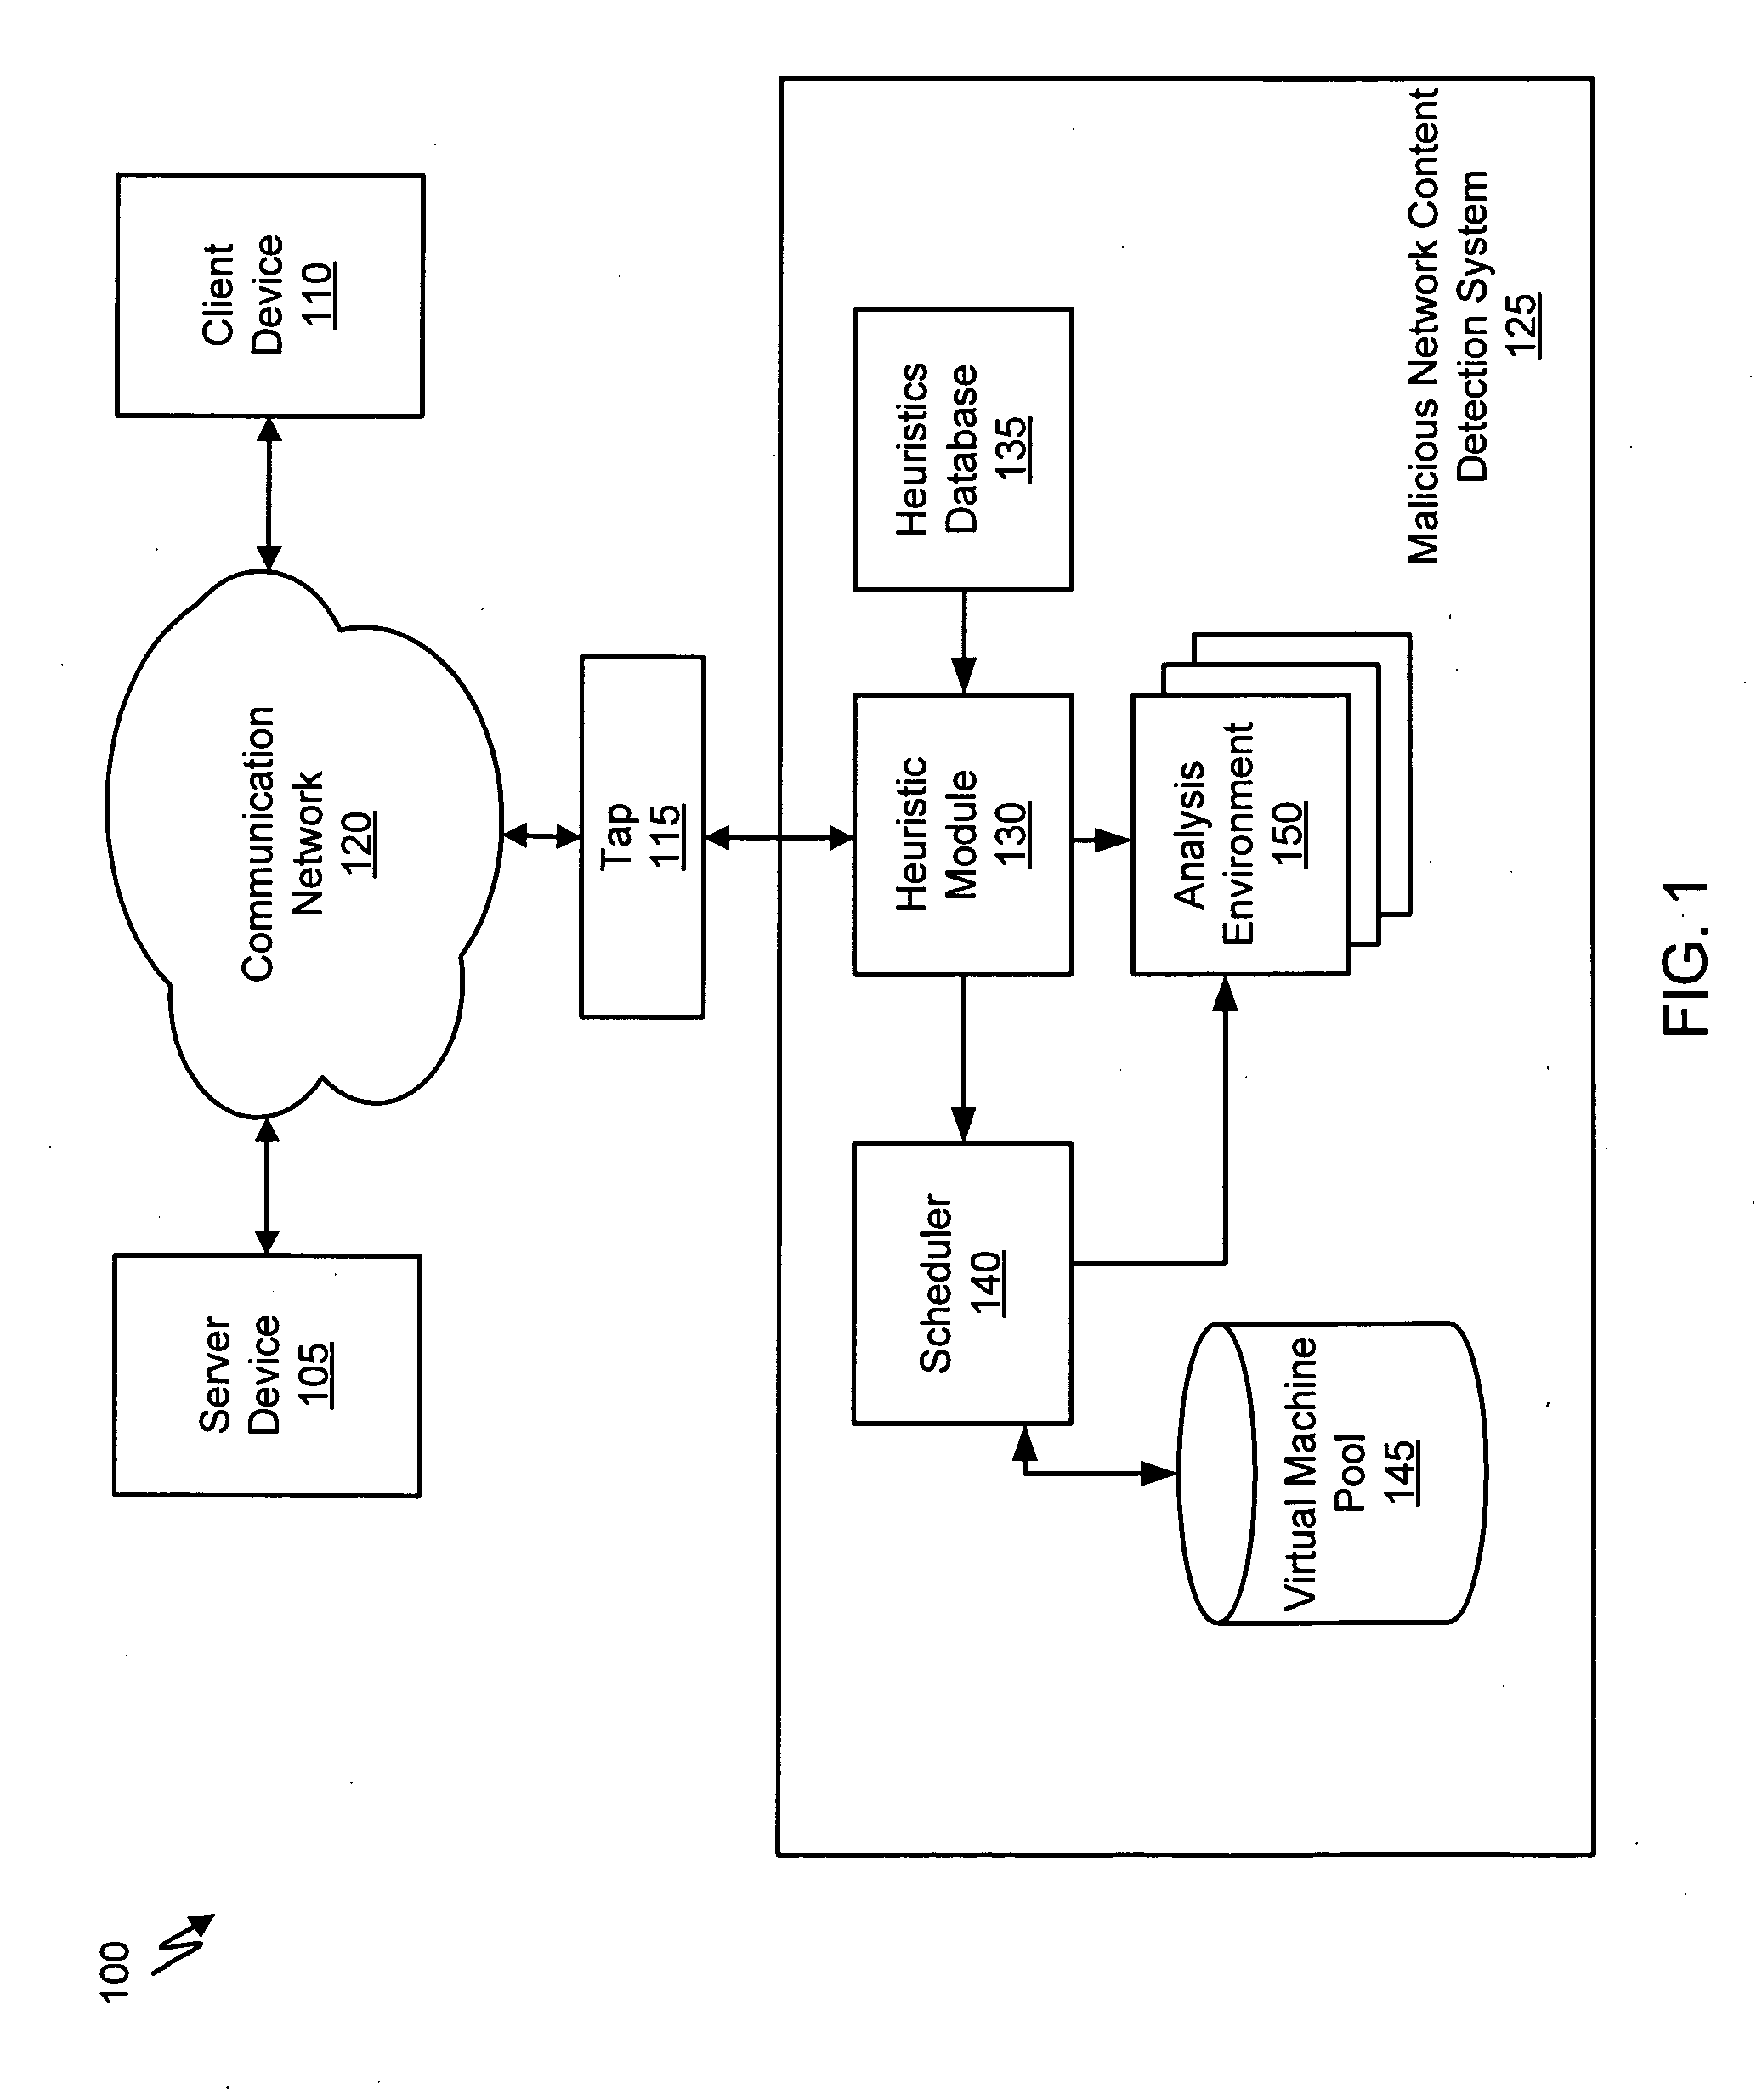 Systems and Methods for Detecting Malicious Network Content